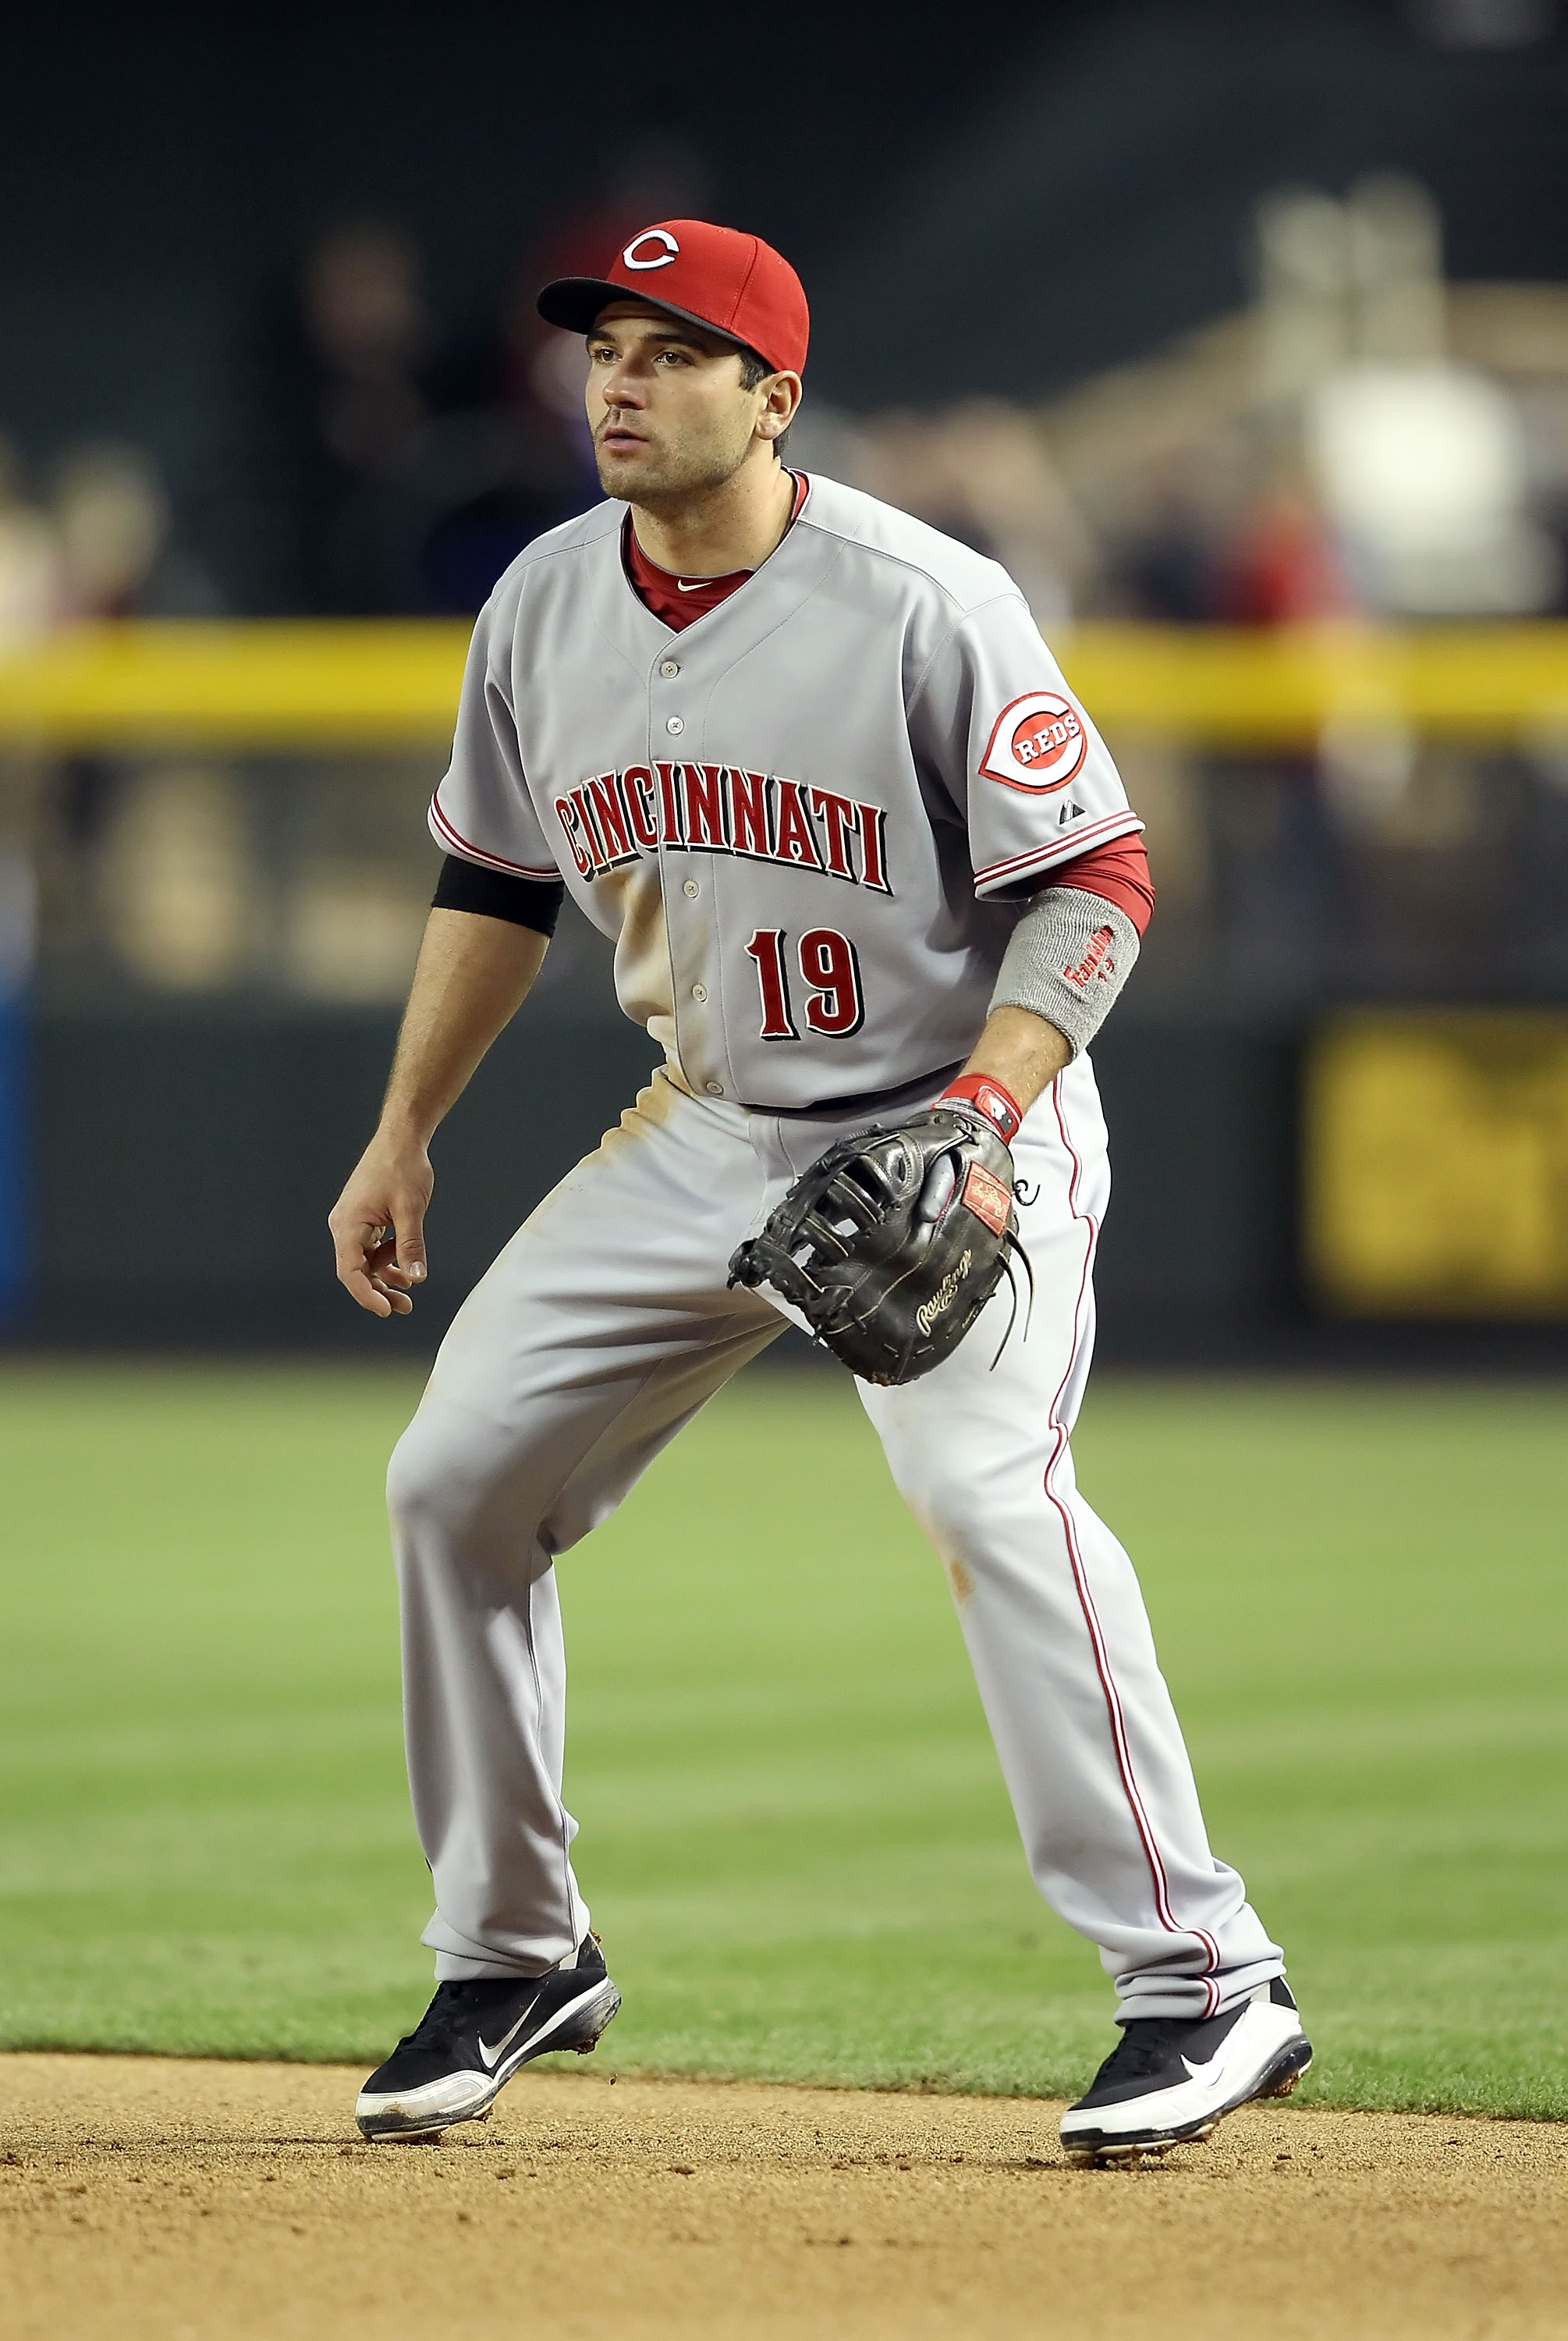 PHOENIX, AZ - APRIL 08:  Inifelder Joey Votto #19 of the Cincinnati Reds in action during the Major League Baseball home opening game against the Arizona Diamondbacks at Chase Field on April 8, 2011 in Phoenix, Arizona. The Diamondbacks defeated the Reds